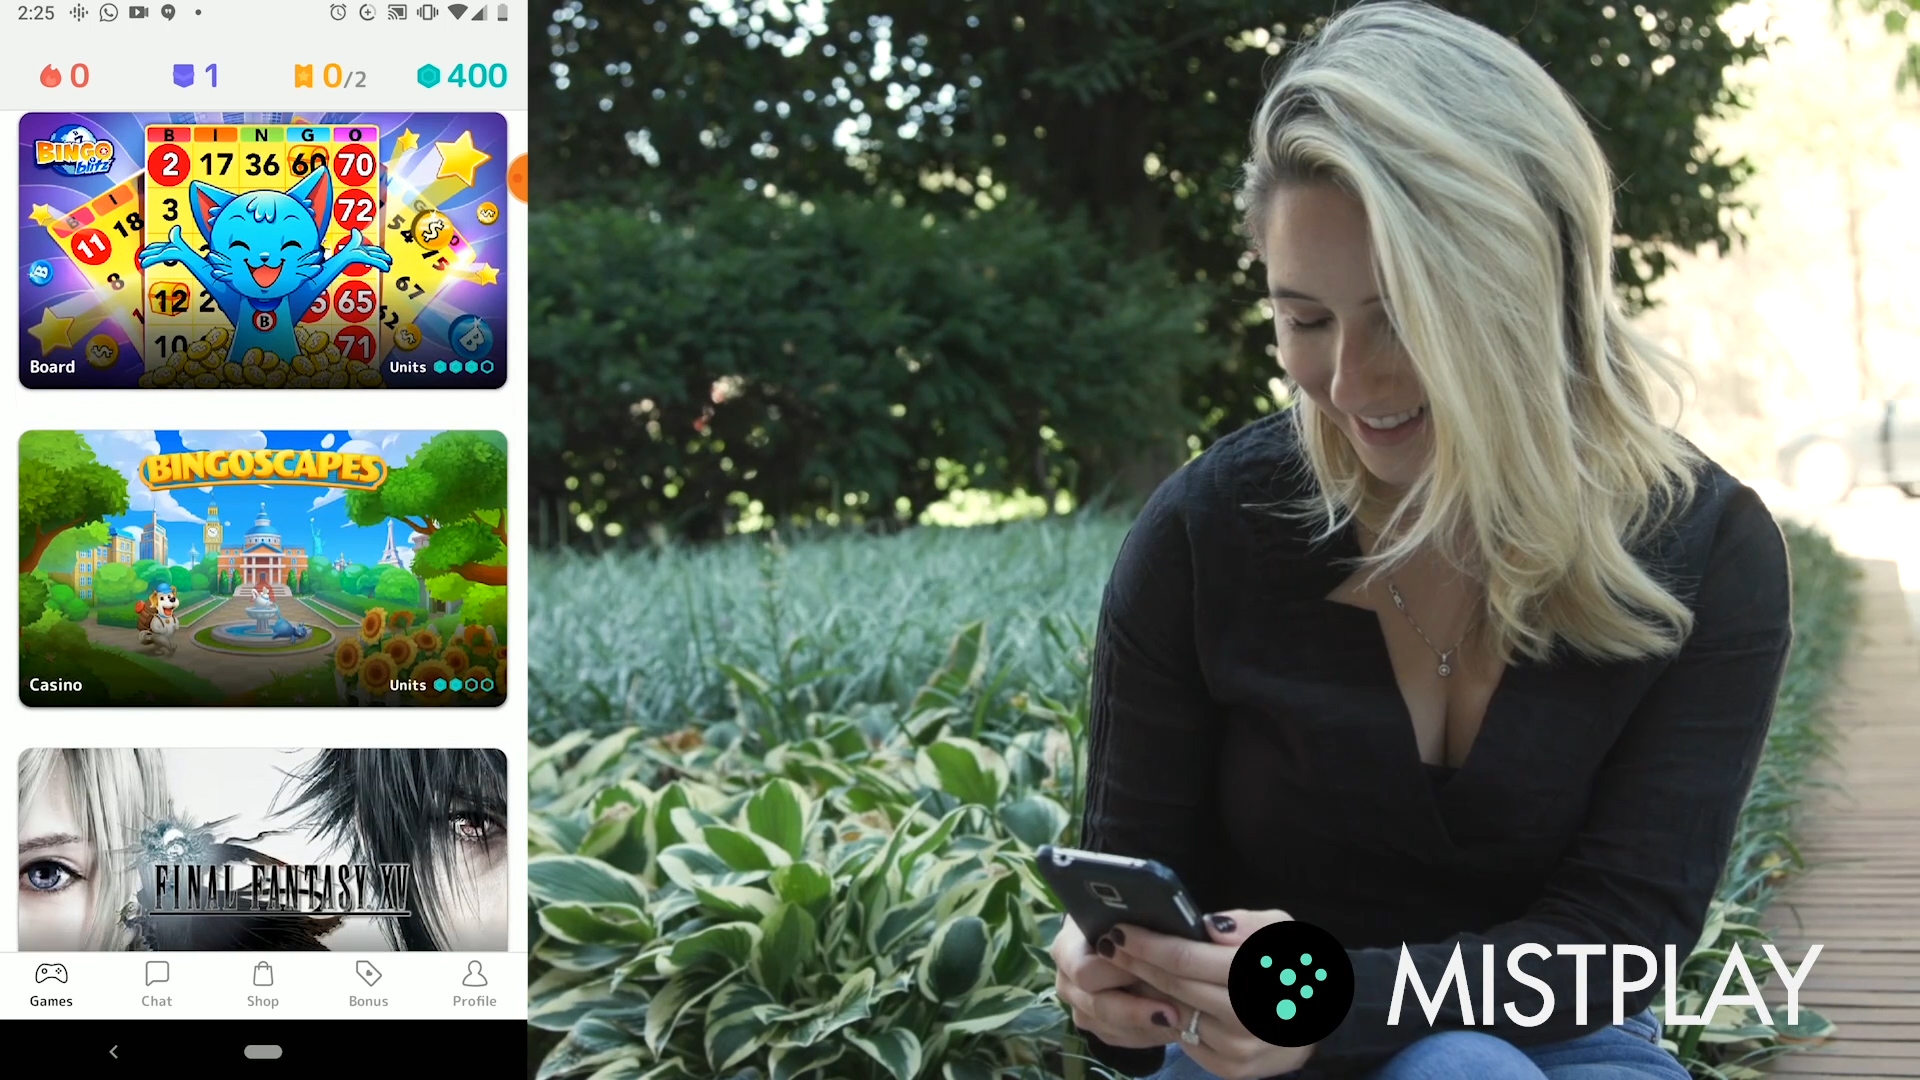 Mistplay Earn Rewards And Make Money With Just A Few Games - mistplay app review earn robux